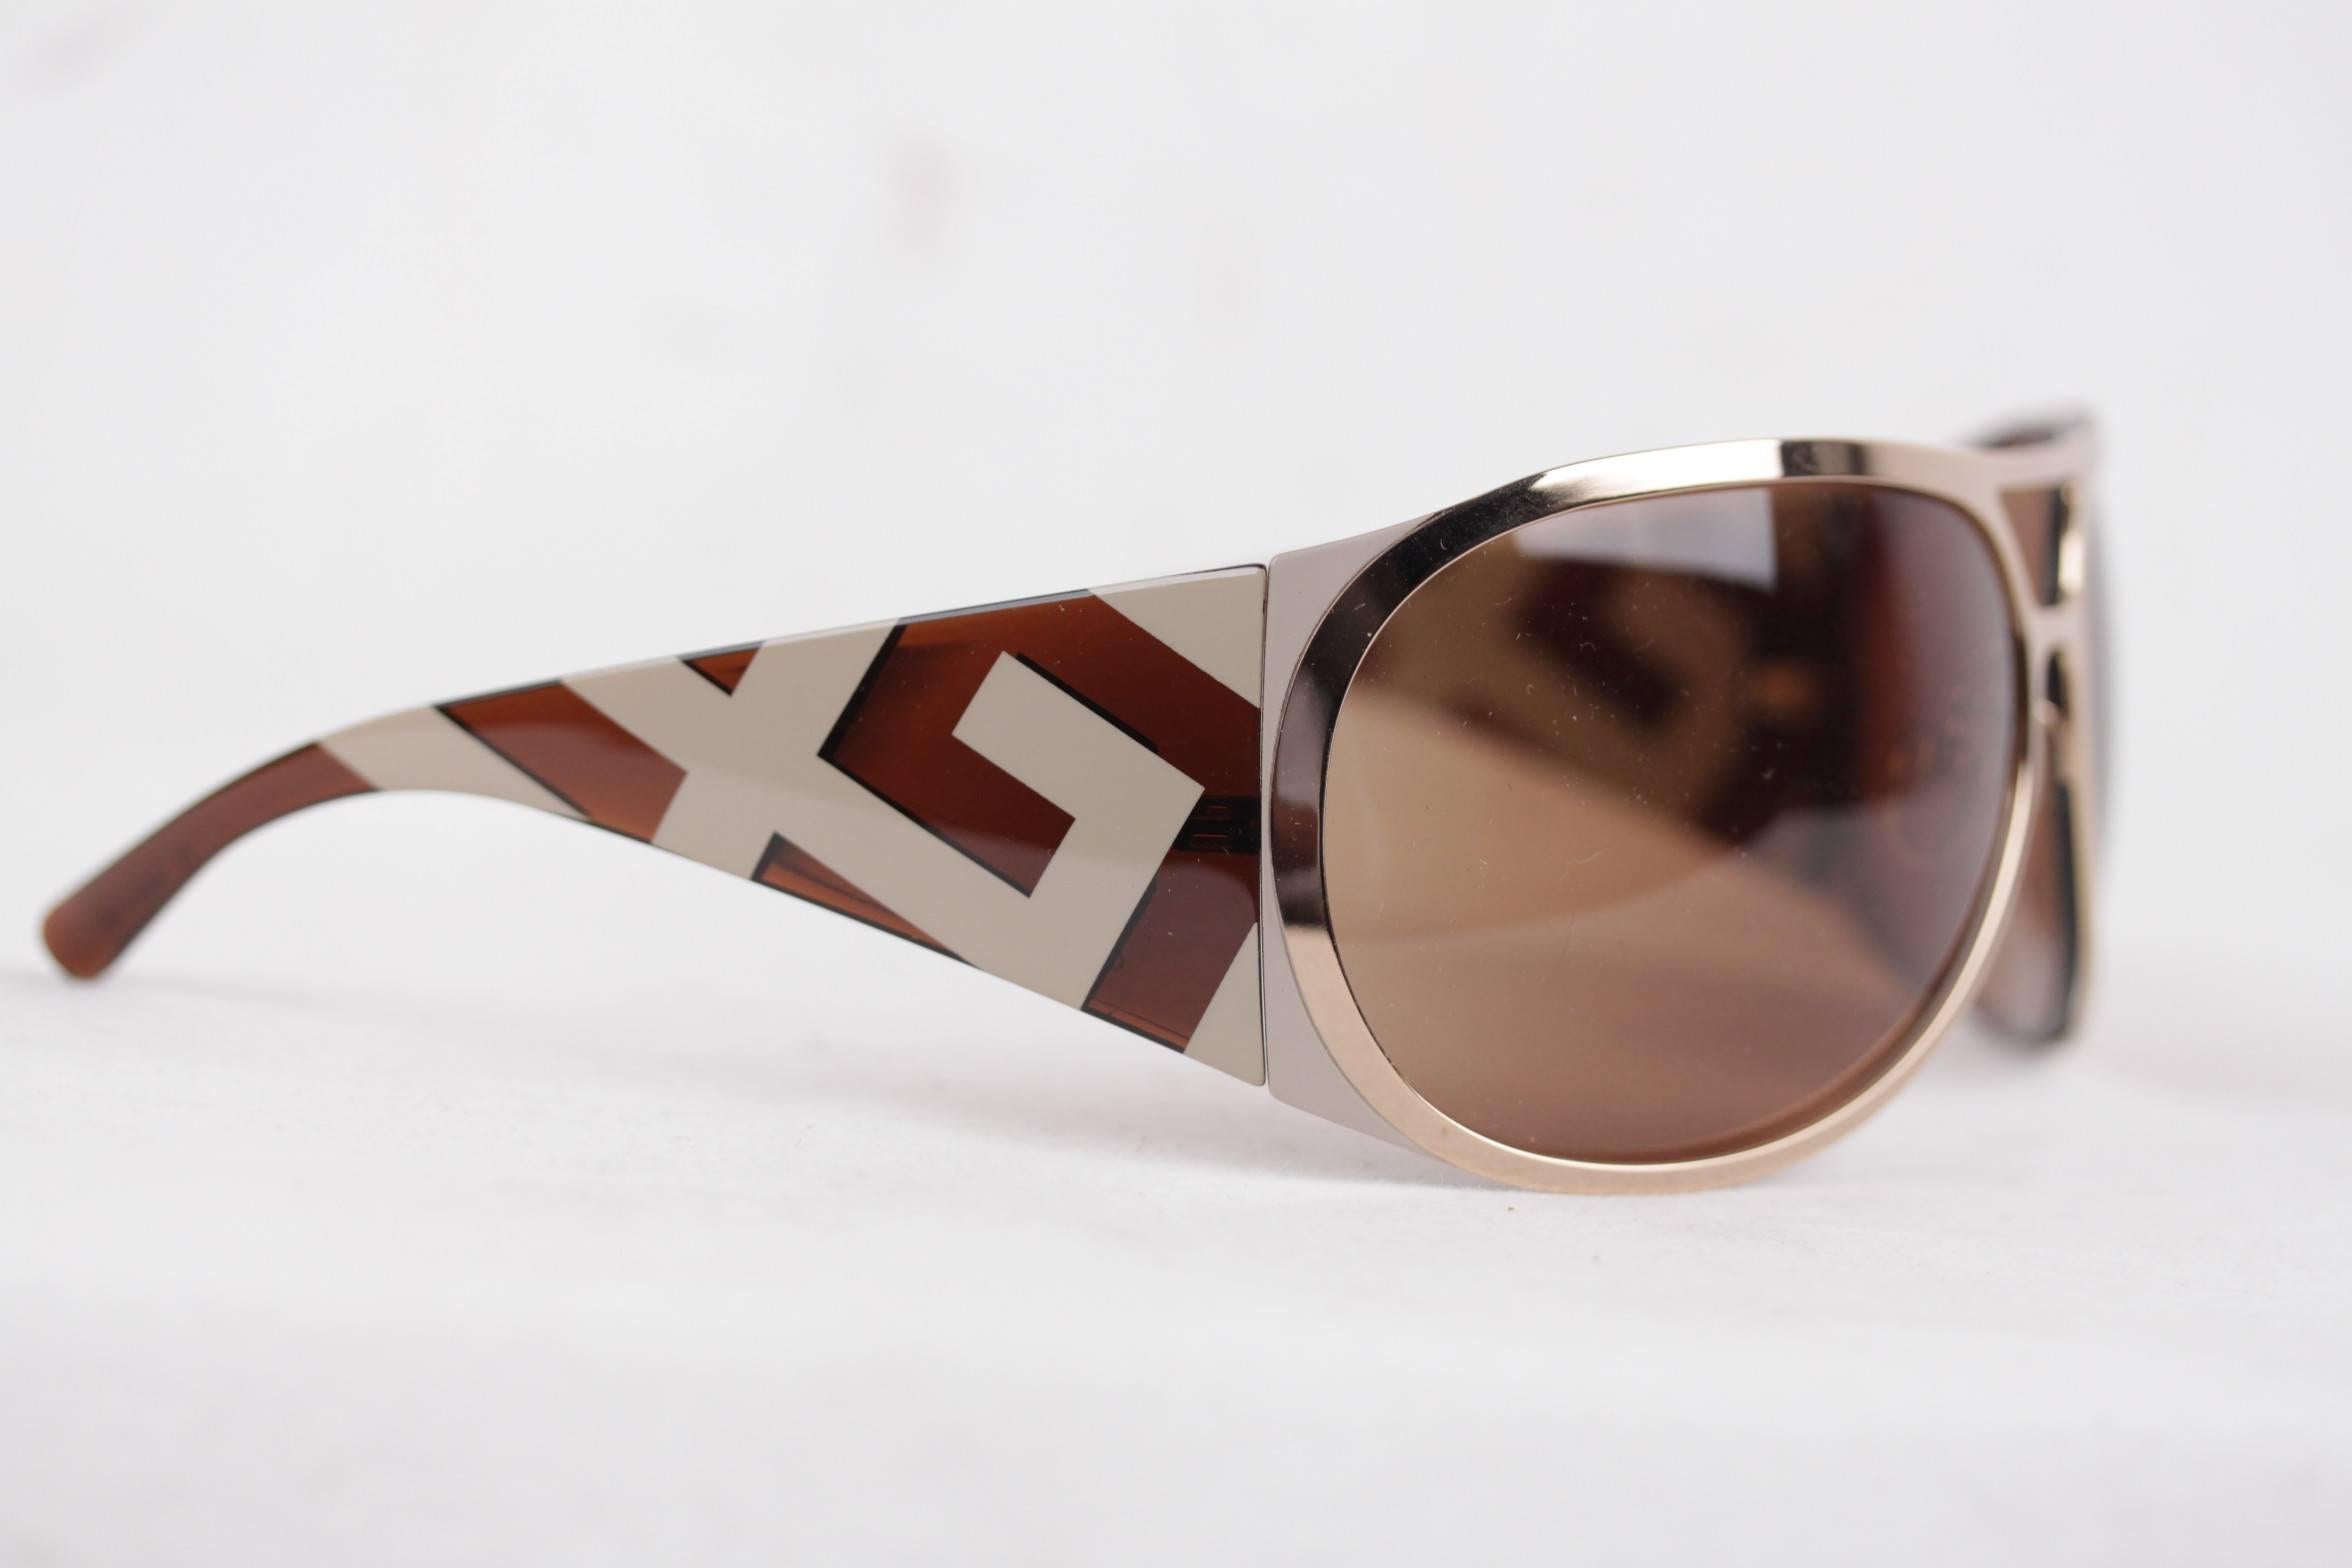 - Wrap sunglasses signed GIVENCHY

- Gold metal aviator-shaped front, with brown plastic arms (with geometric pattern

- Original Brown lenses

- Style & Ref: SGV 219 - Col. 300

Any other detail which is not mentioned may be seen on the